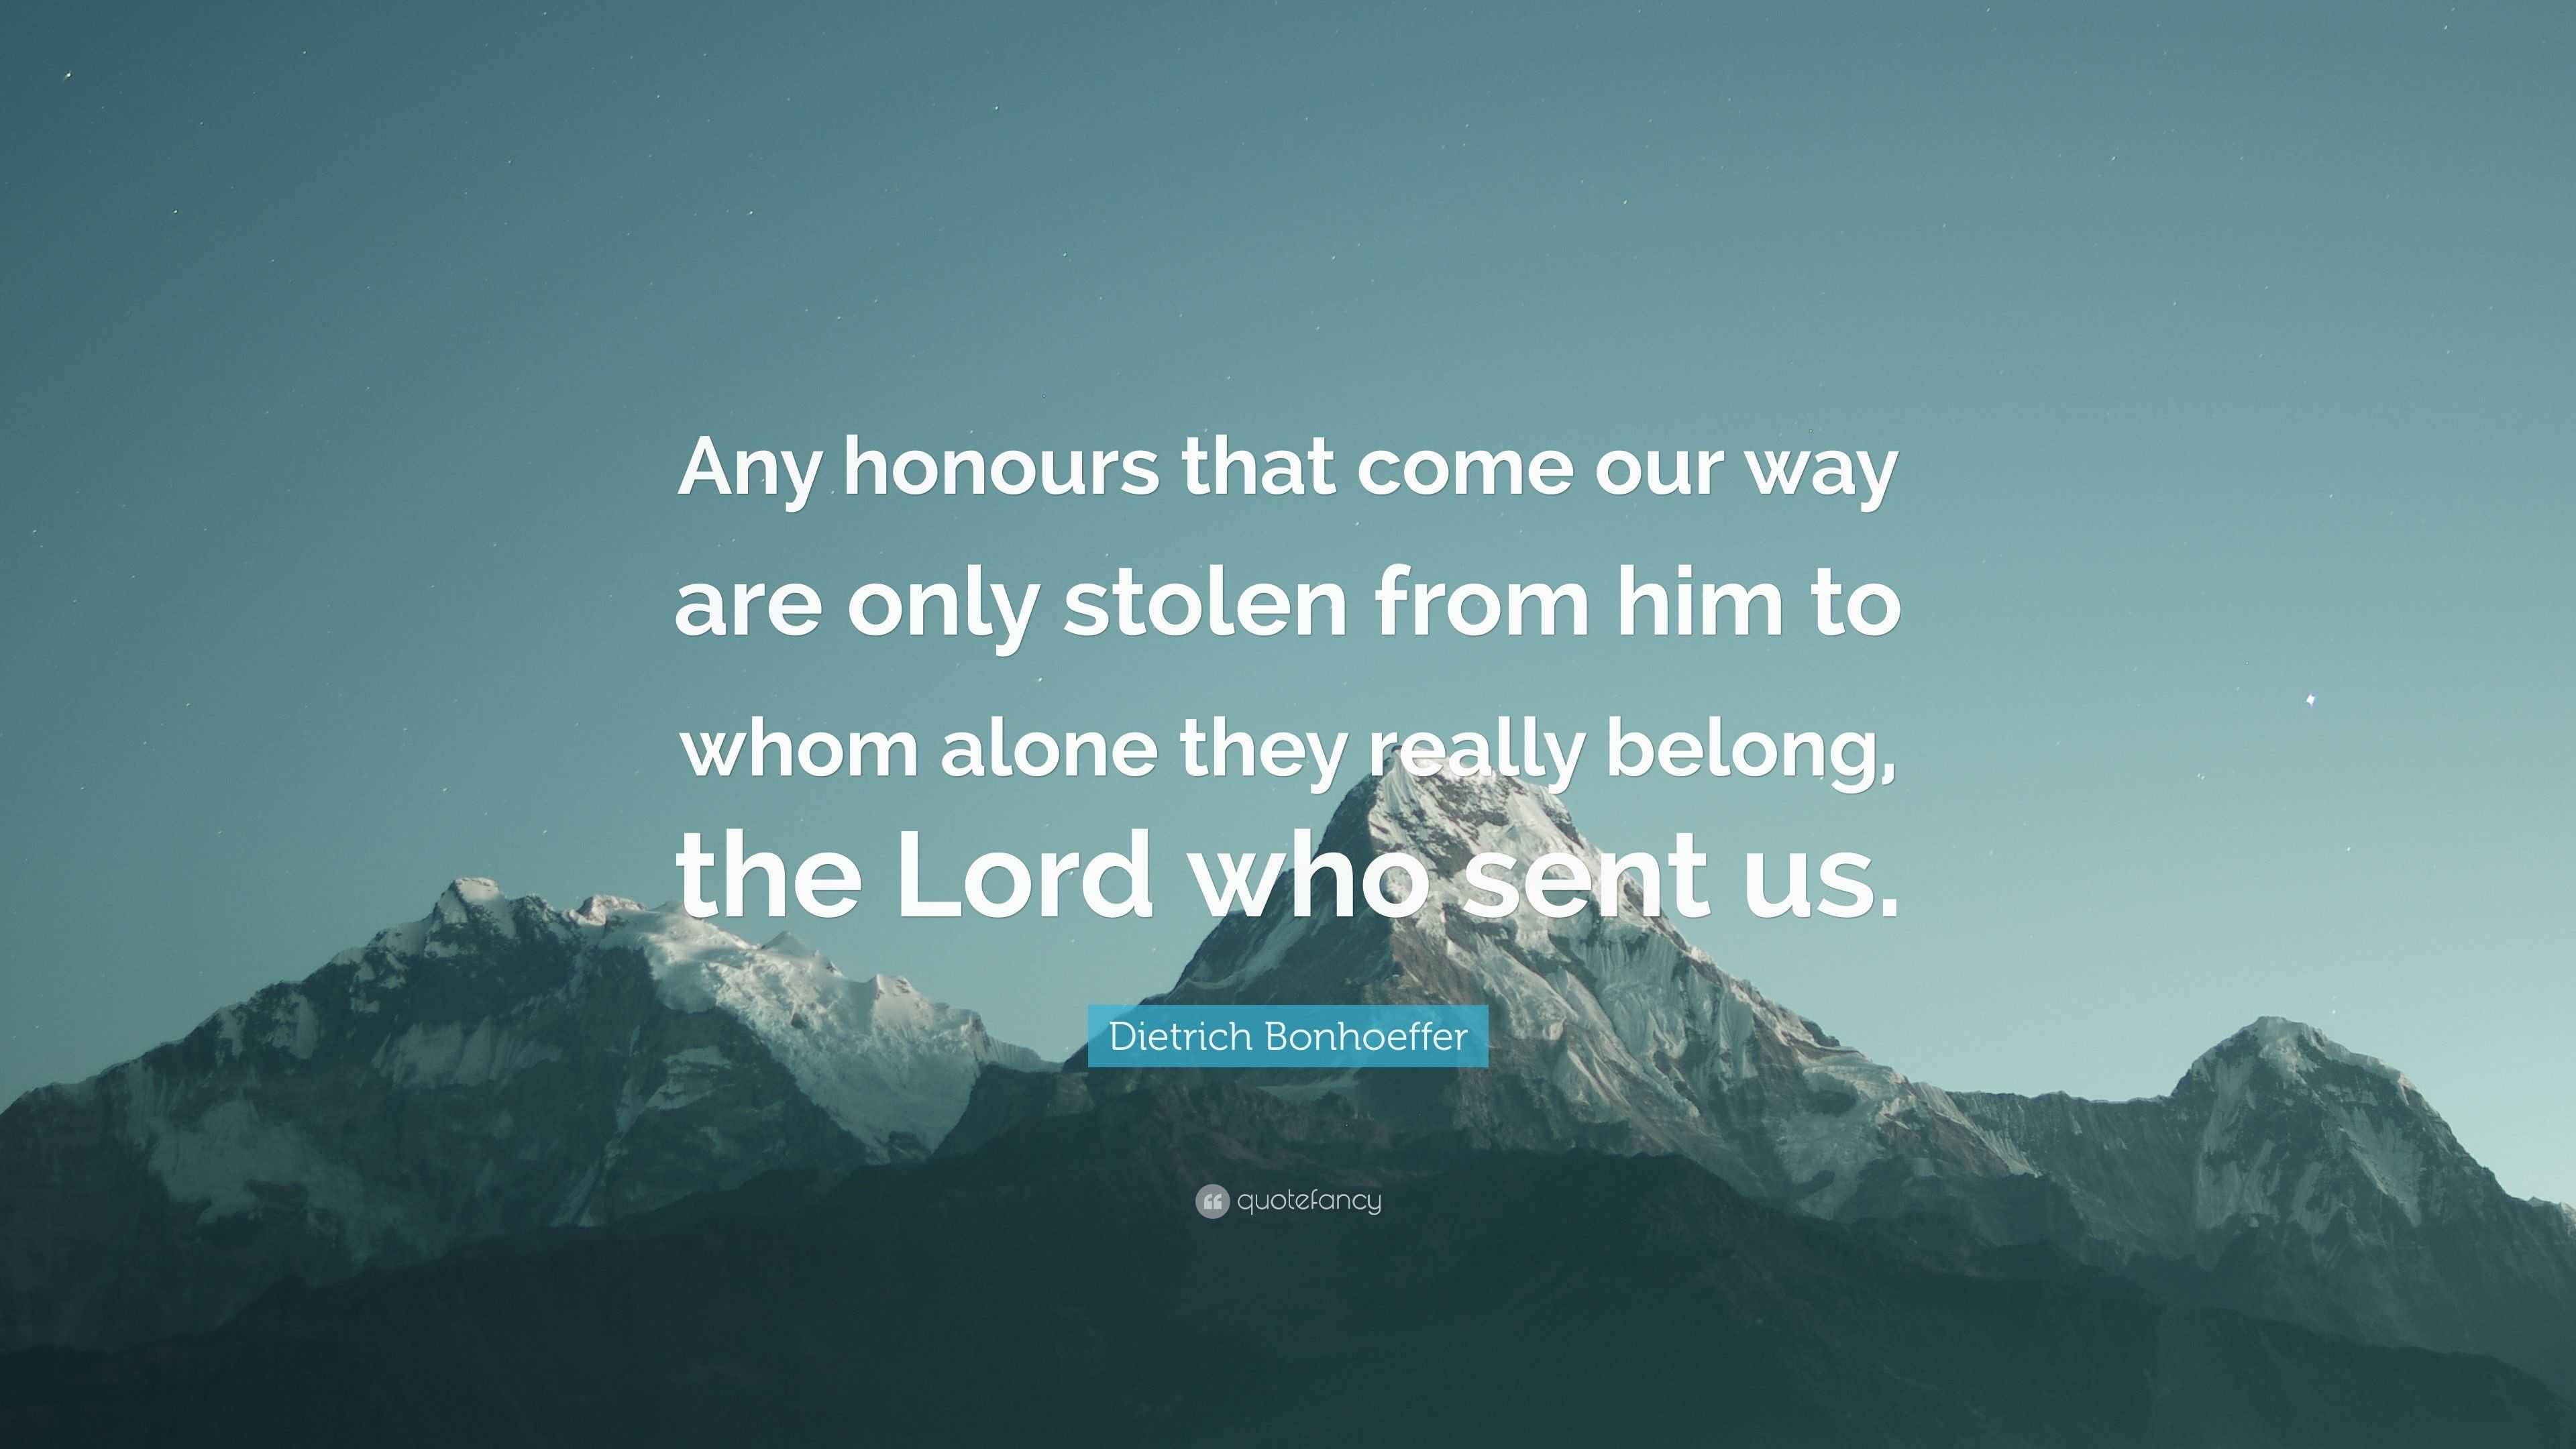 Dietrich Bonhoeffer Quote: “Any honours that come our way are only ...